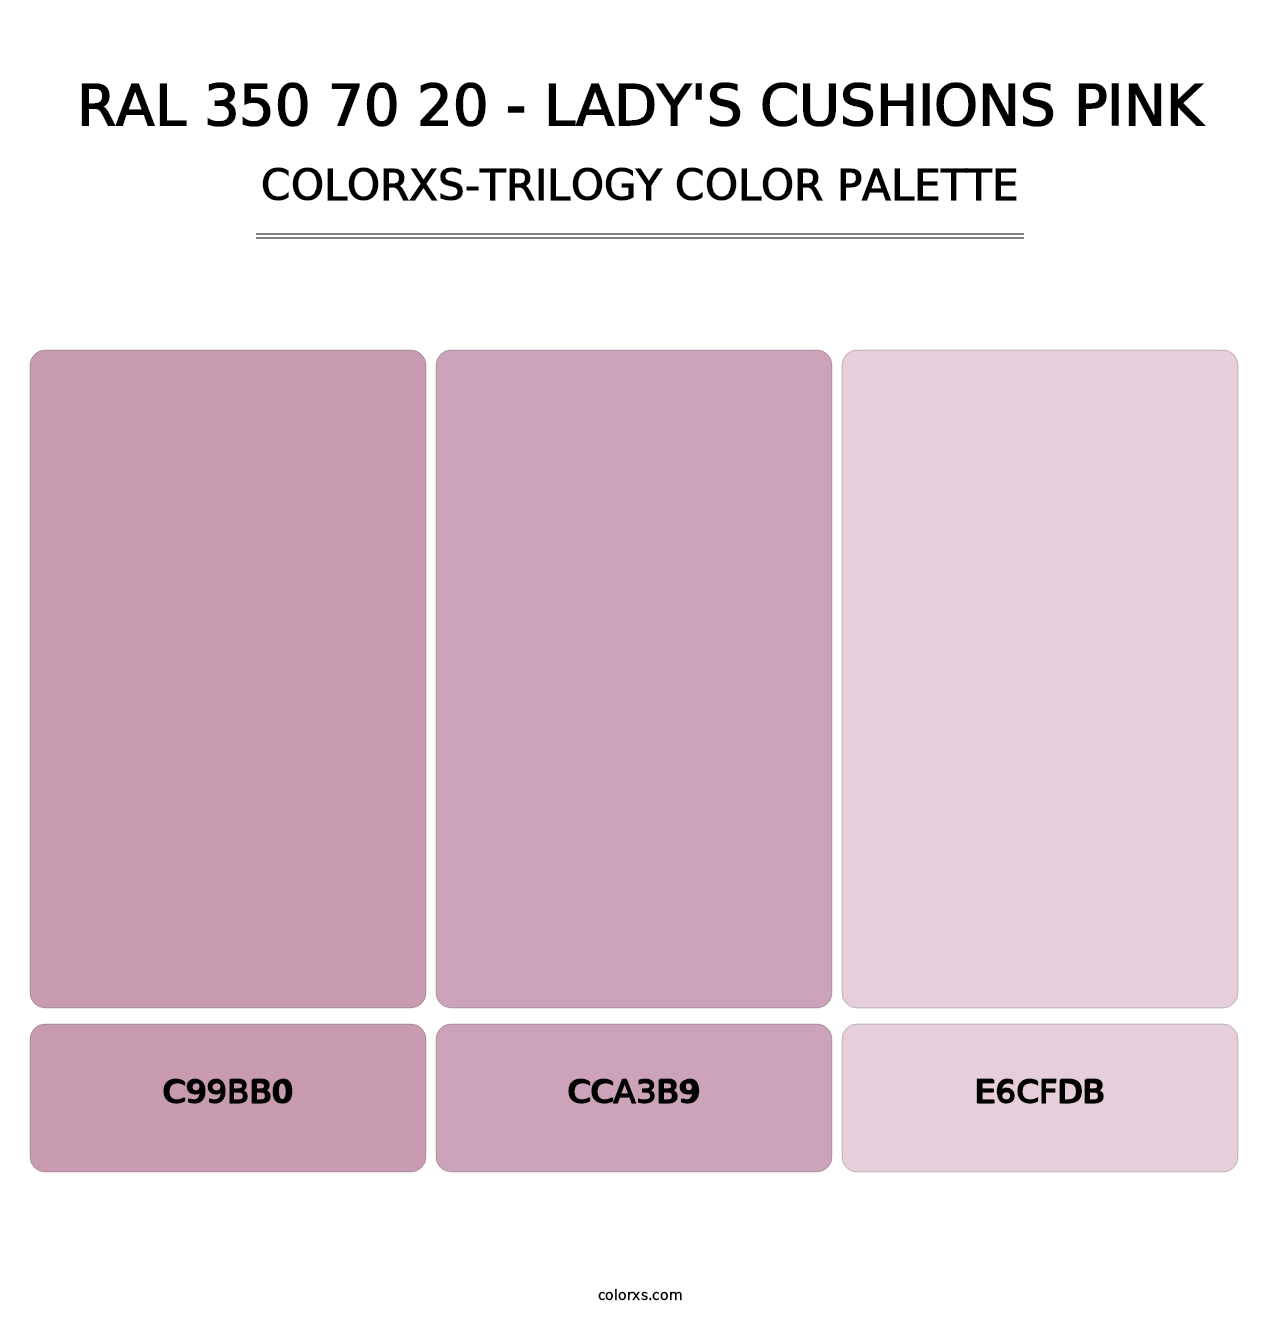 RAL 350 70 20 - Lady's Cushions Pink - Colorxs Trilogy Palette